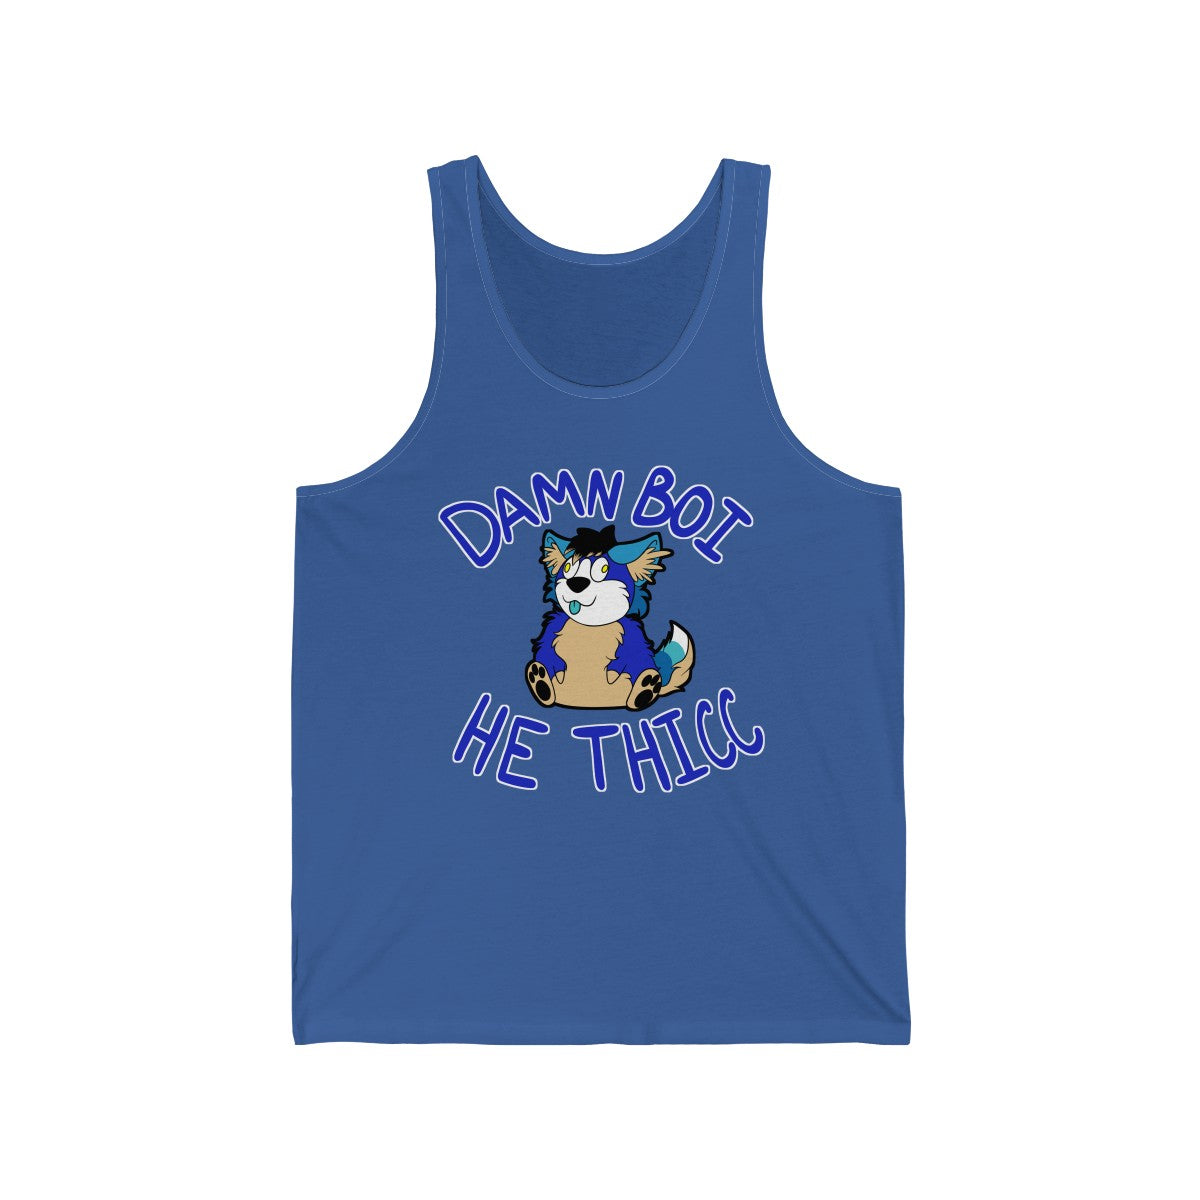 Thicc Boi With Text - Tank Top Tank Top AFLT-Hund The Hound Royal Blue XS 